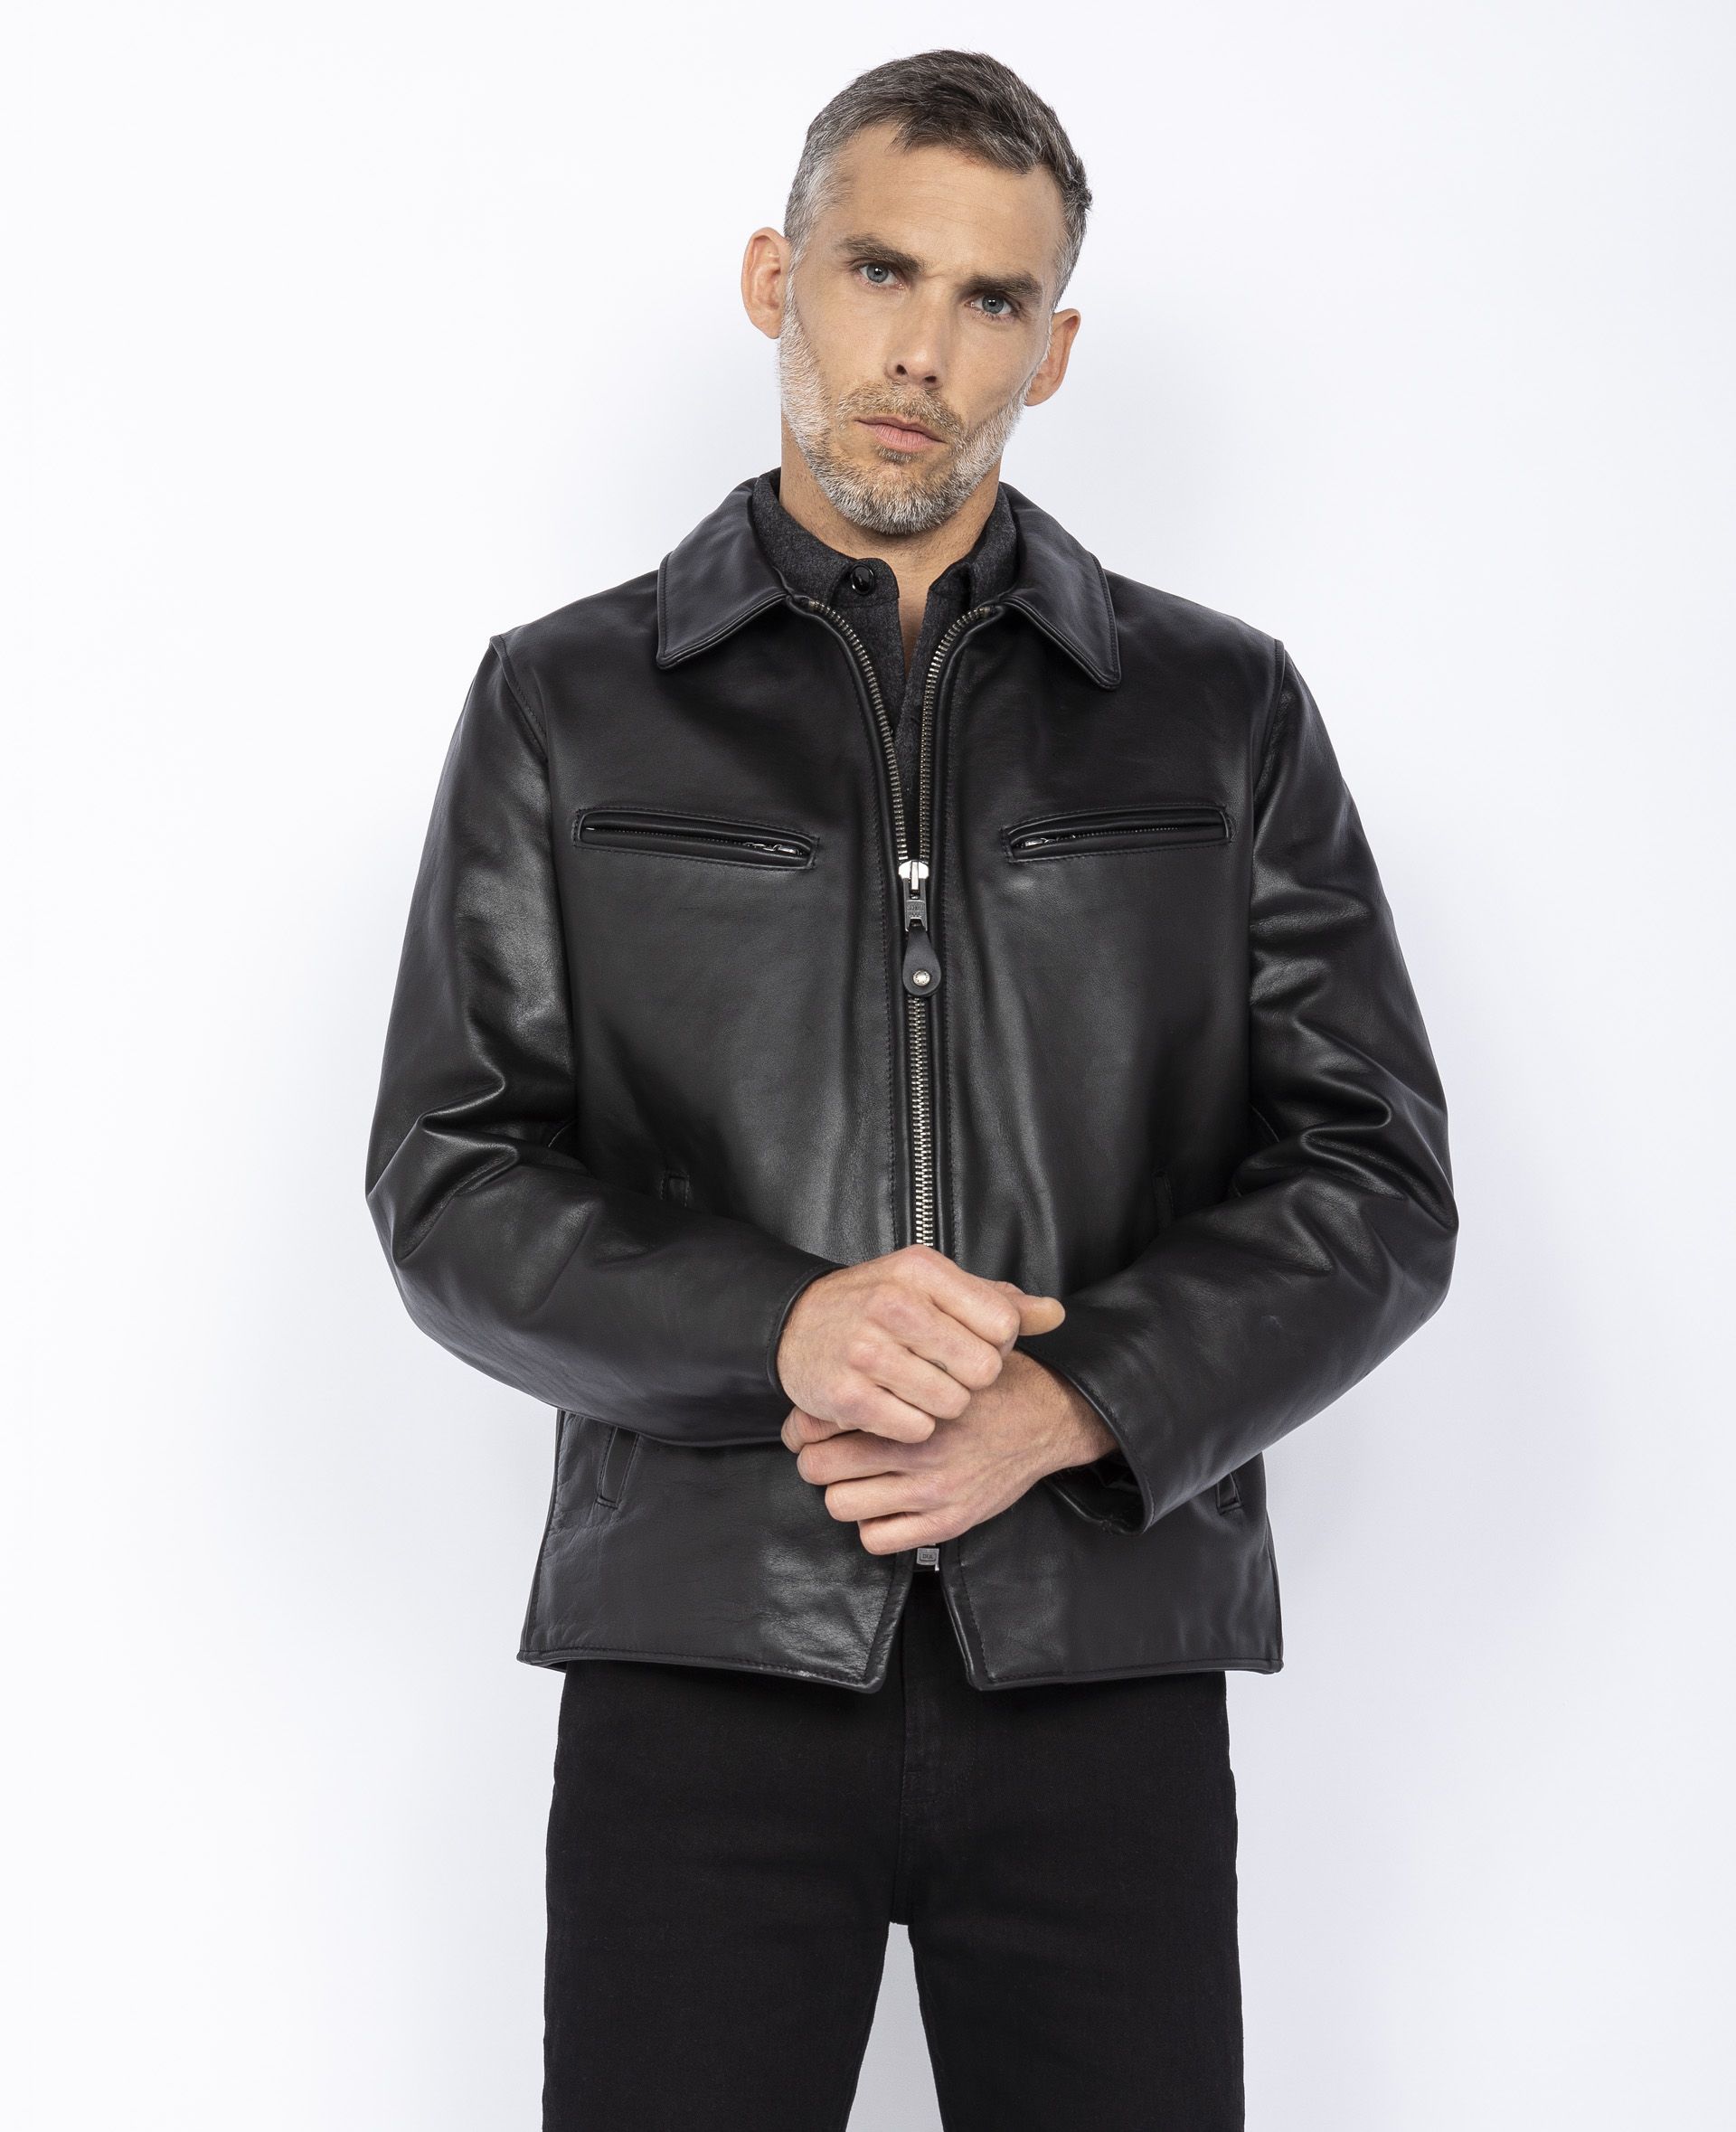 Buy Biker jacket mythical USA, cowhide leather man 100% cowhide